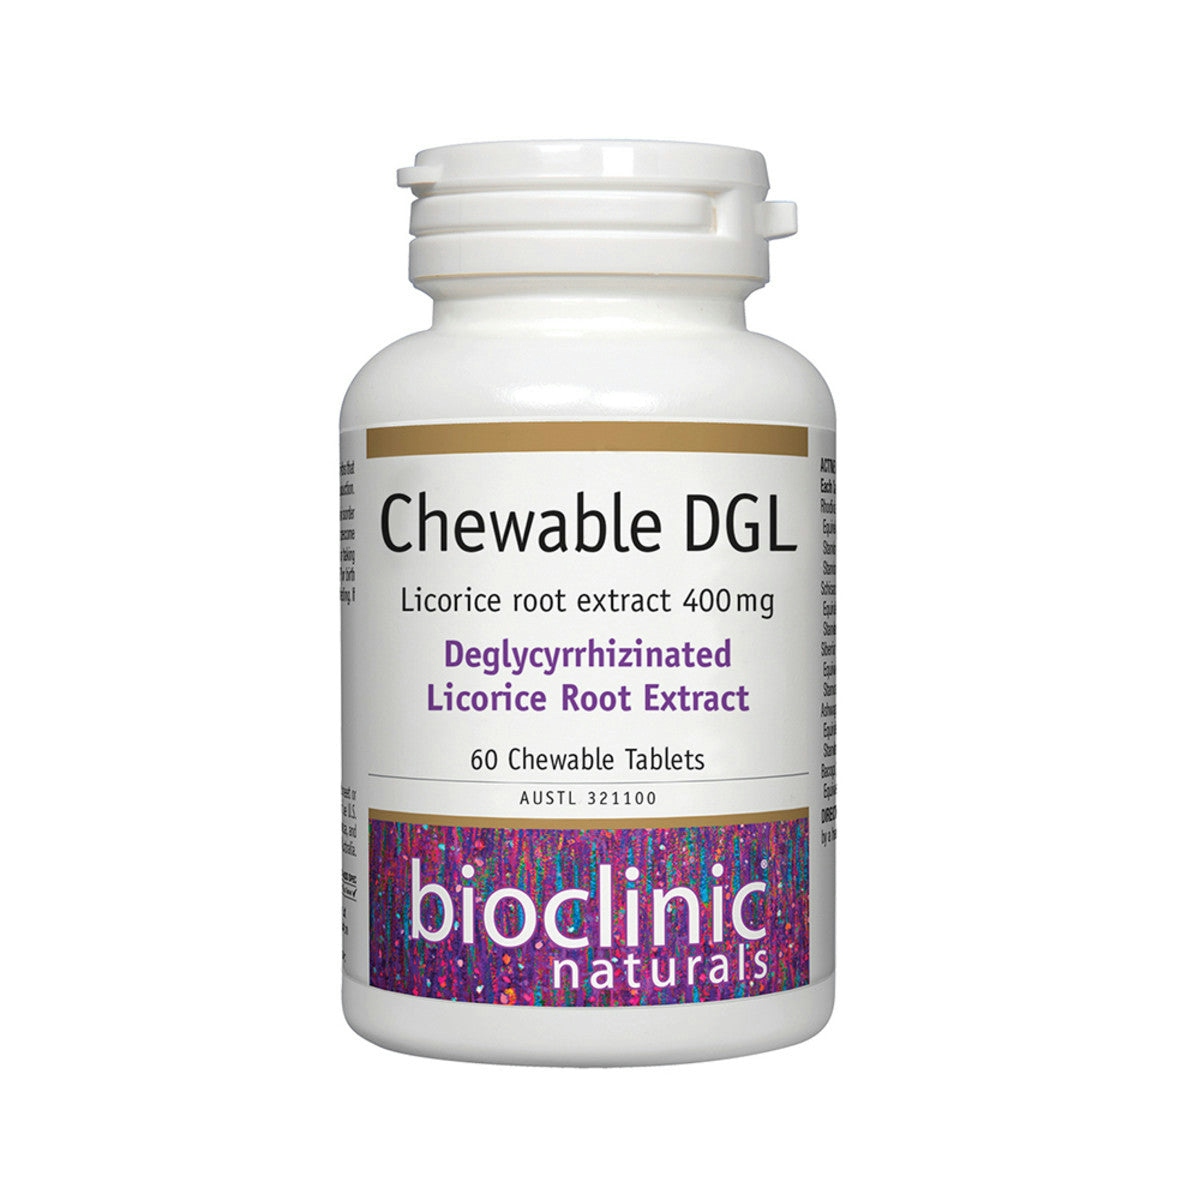 Image of Bioclinic Naturals Chewable DGL 60t with a white background